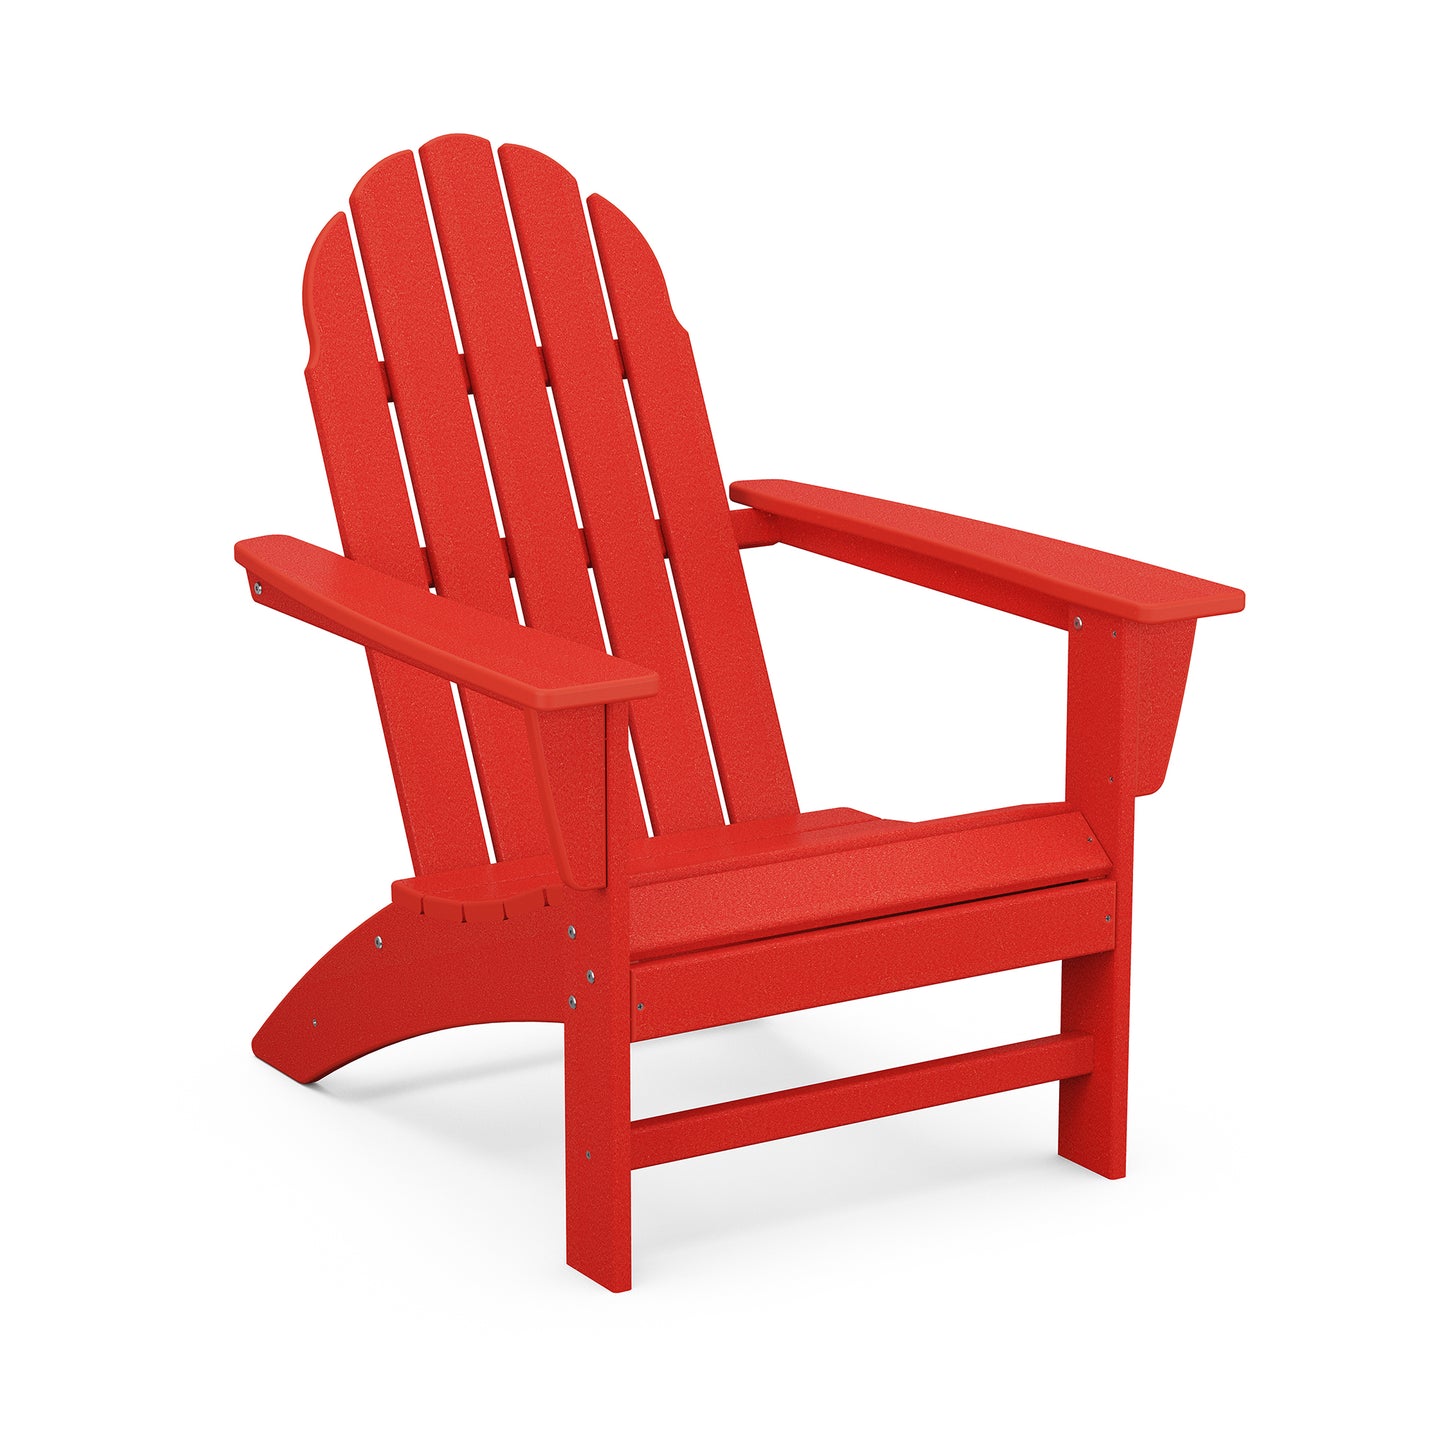 A bright red POLYWOOD Vineyard Adirondack Chair isolated on a white background. The chair features a traditional slatted back and wide armrests.